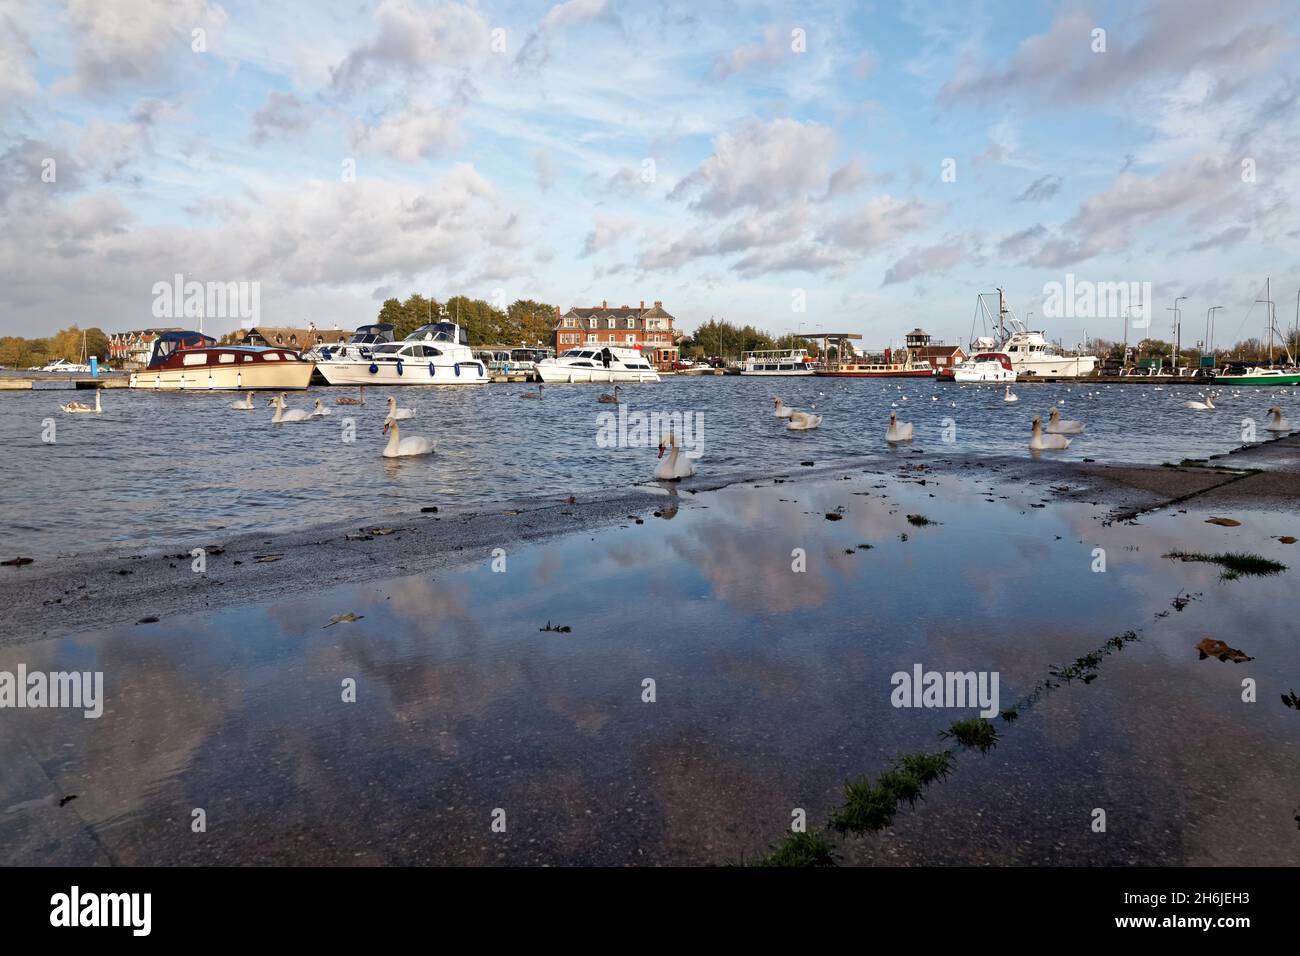 Oulton broad, Swans enjoying the high water with moored boats and the wherry hotel in the background, Stock Photo